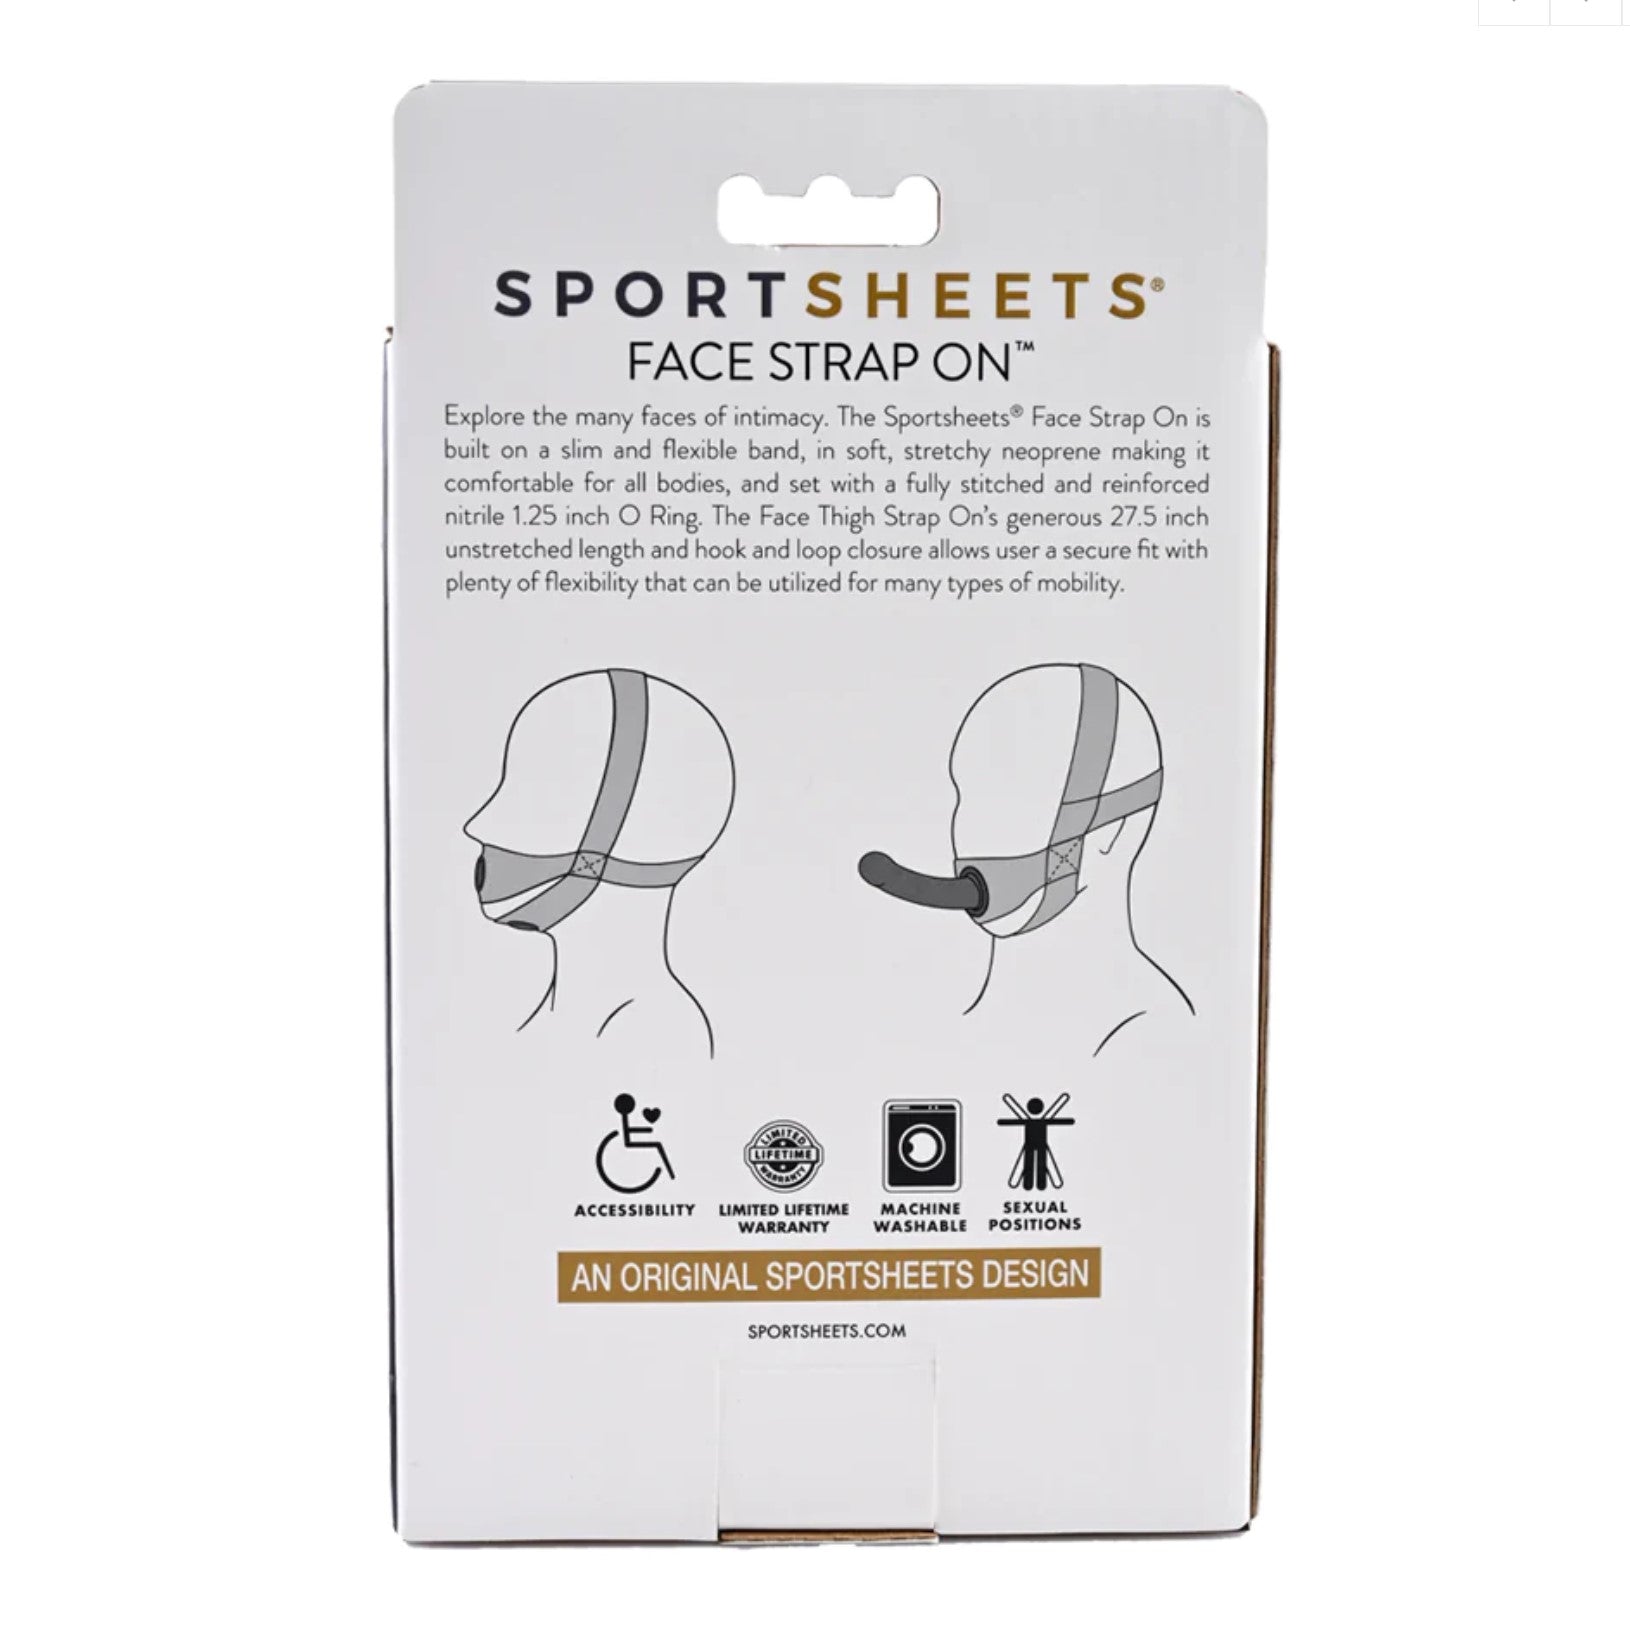 Face Strap On Sportsheets